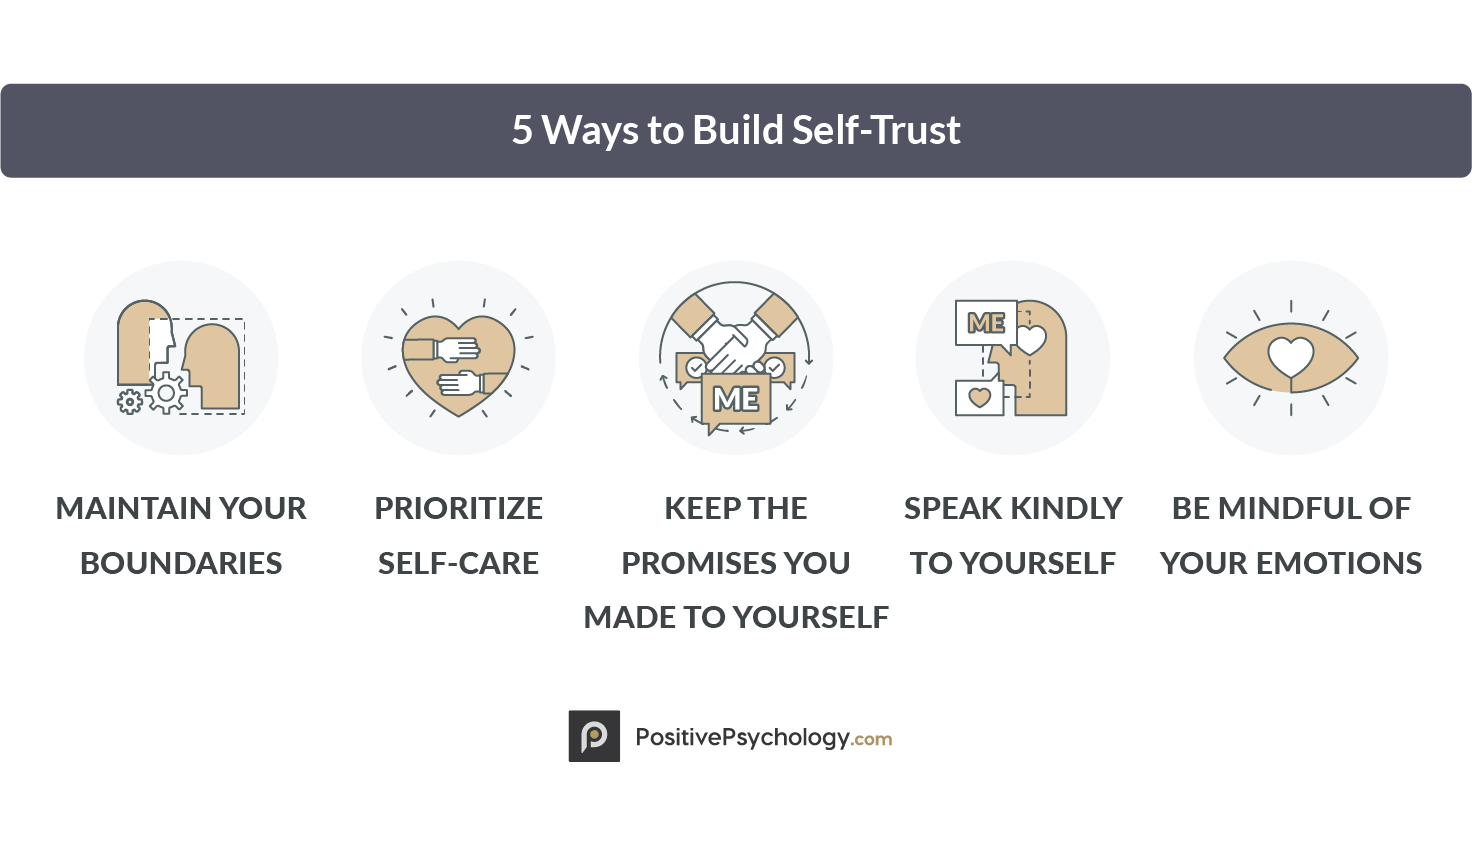 In a learning to relationship trust 10 Steps